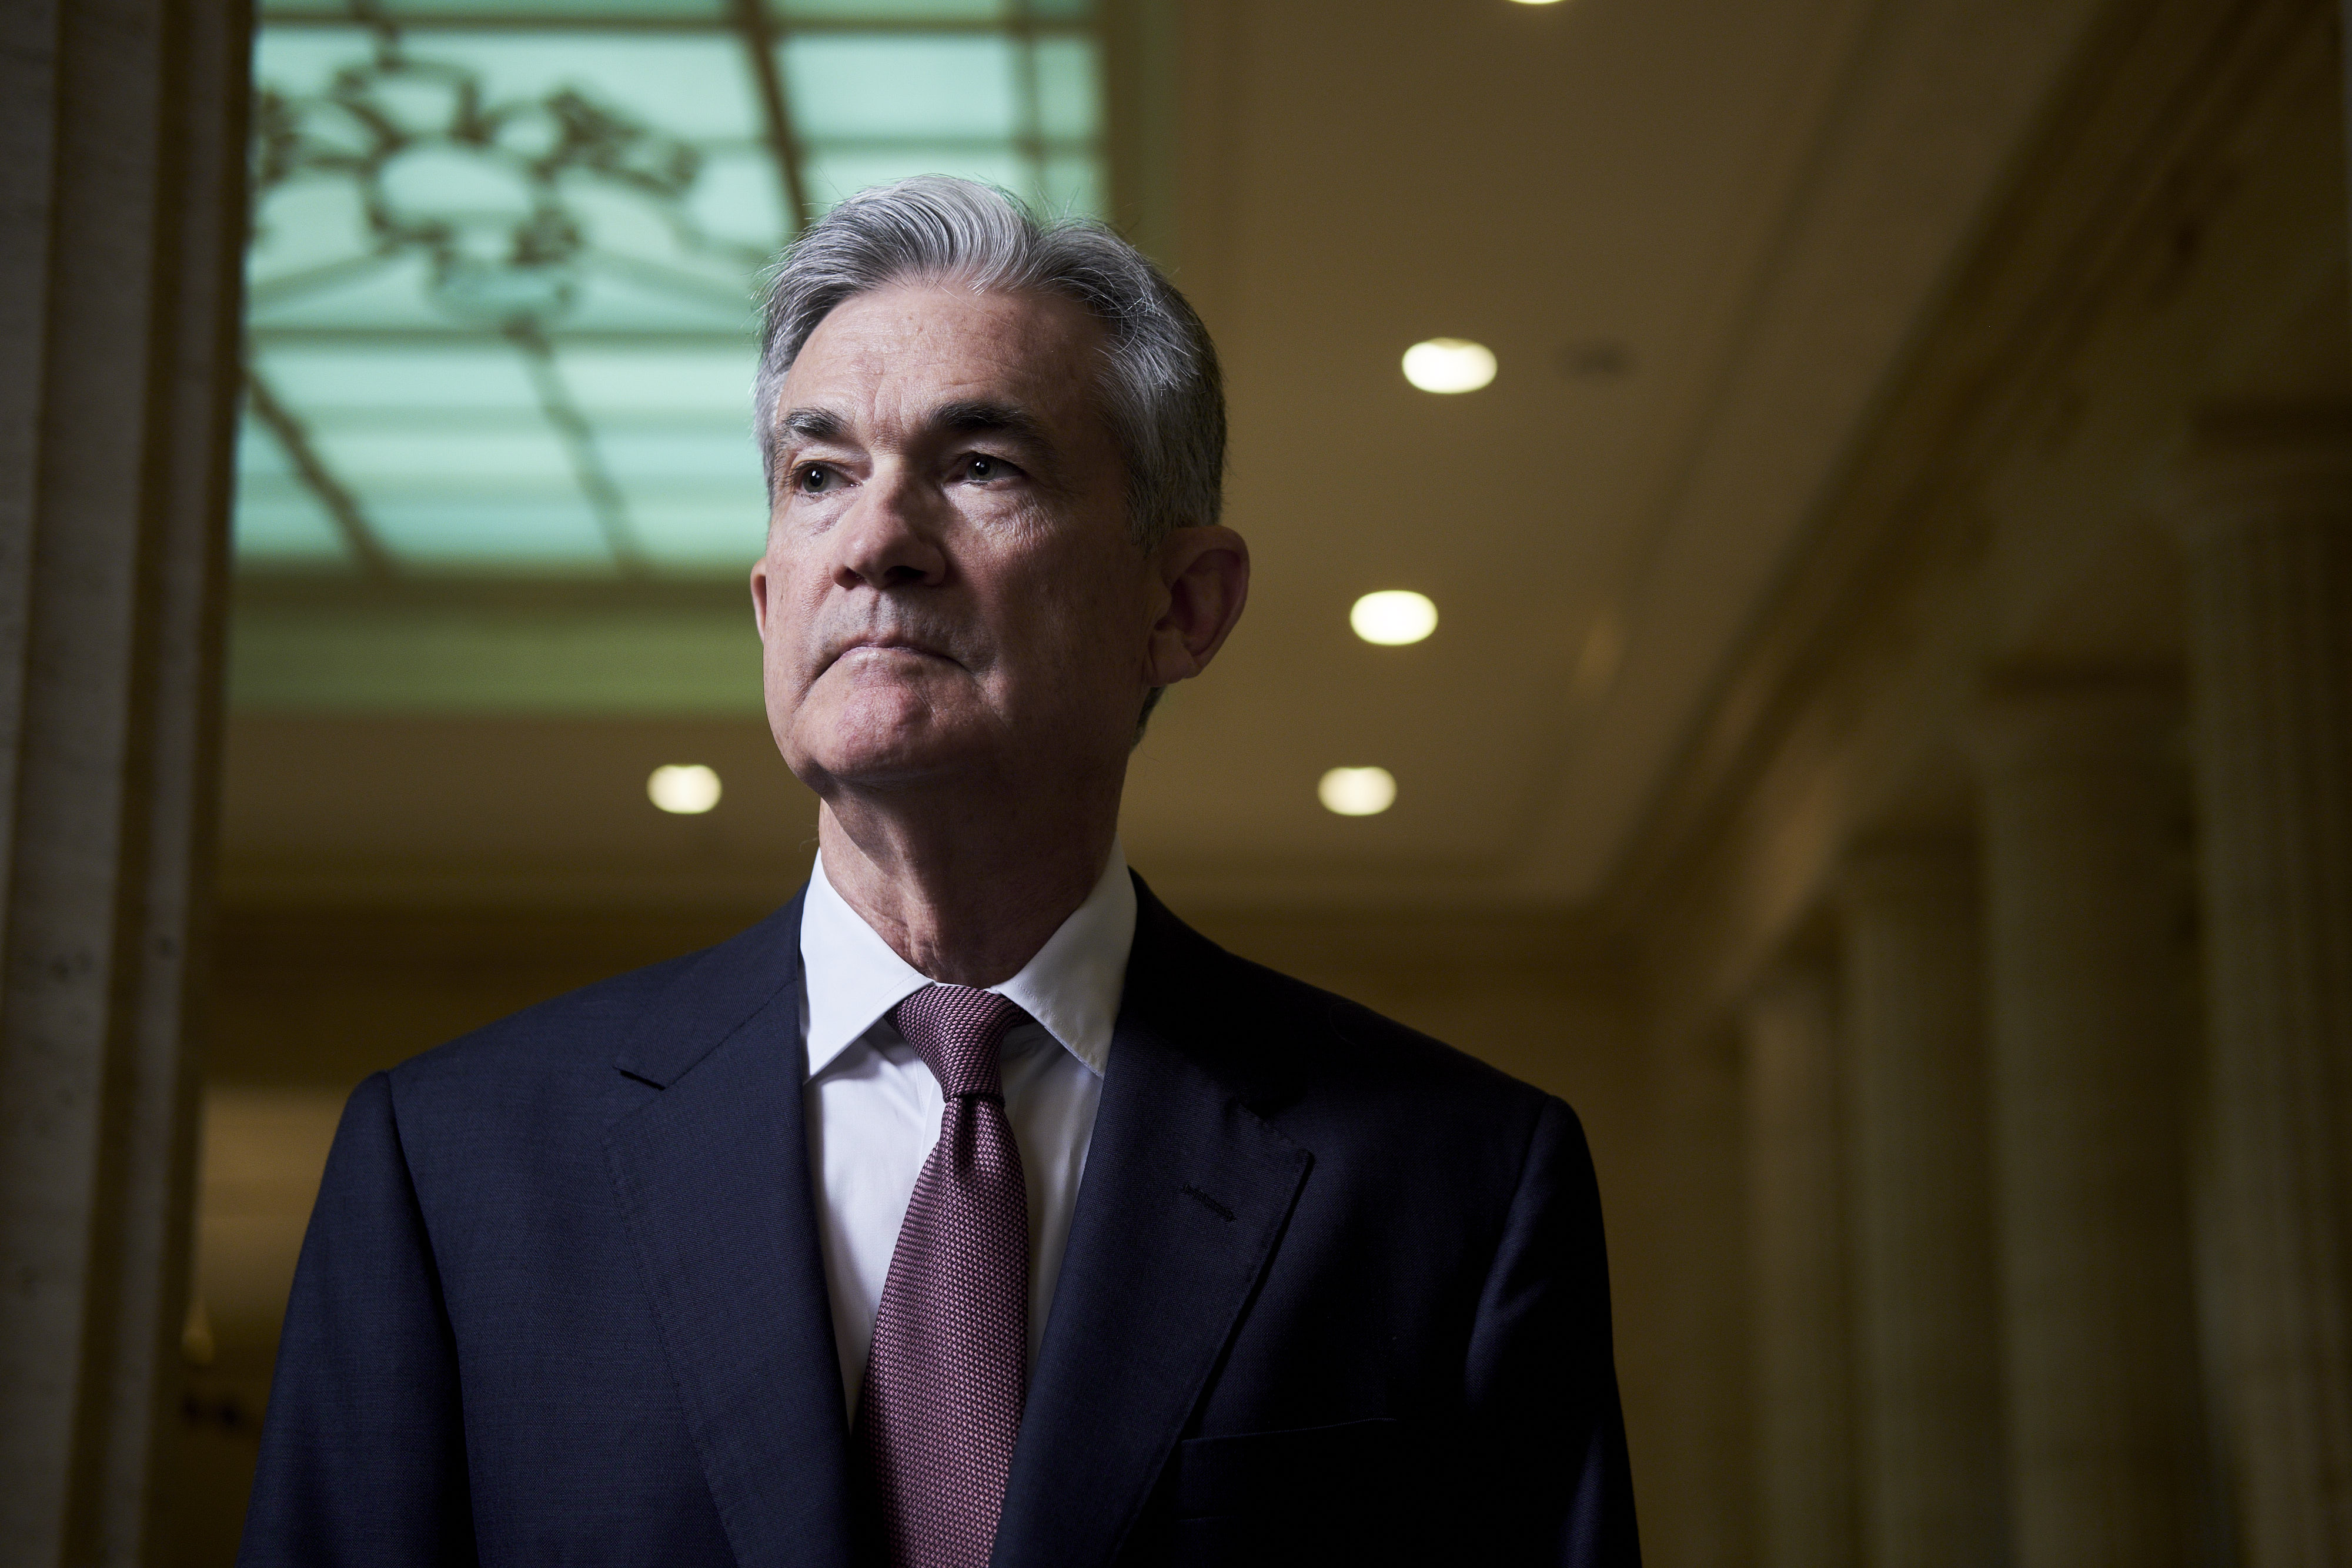 Jay Powell, governor of the U.S. Federal Reserve, stands for a photograph at the board's headquarters in Washington, D.C., on April 13, 2017. As the lone Republican on the Fed's seven-seat board and someone with in-depth knowledge of how the central bank works, Powell's influence looks set to increase as President Donald Trump prepares to fill three vacancies. (T.J. Kirkpatrick—Bloomberg/Getty Images)